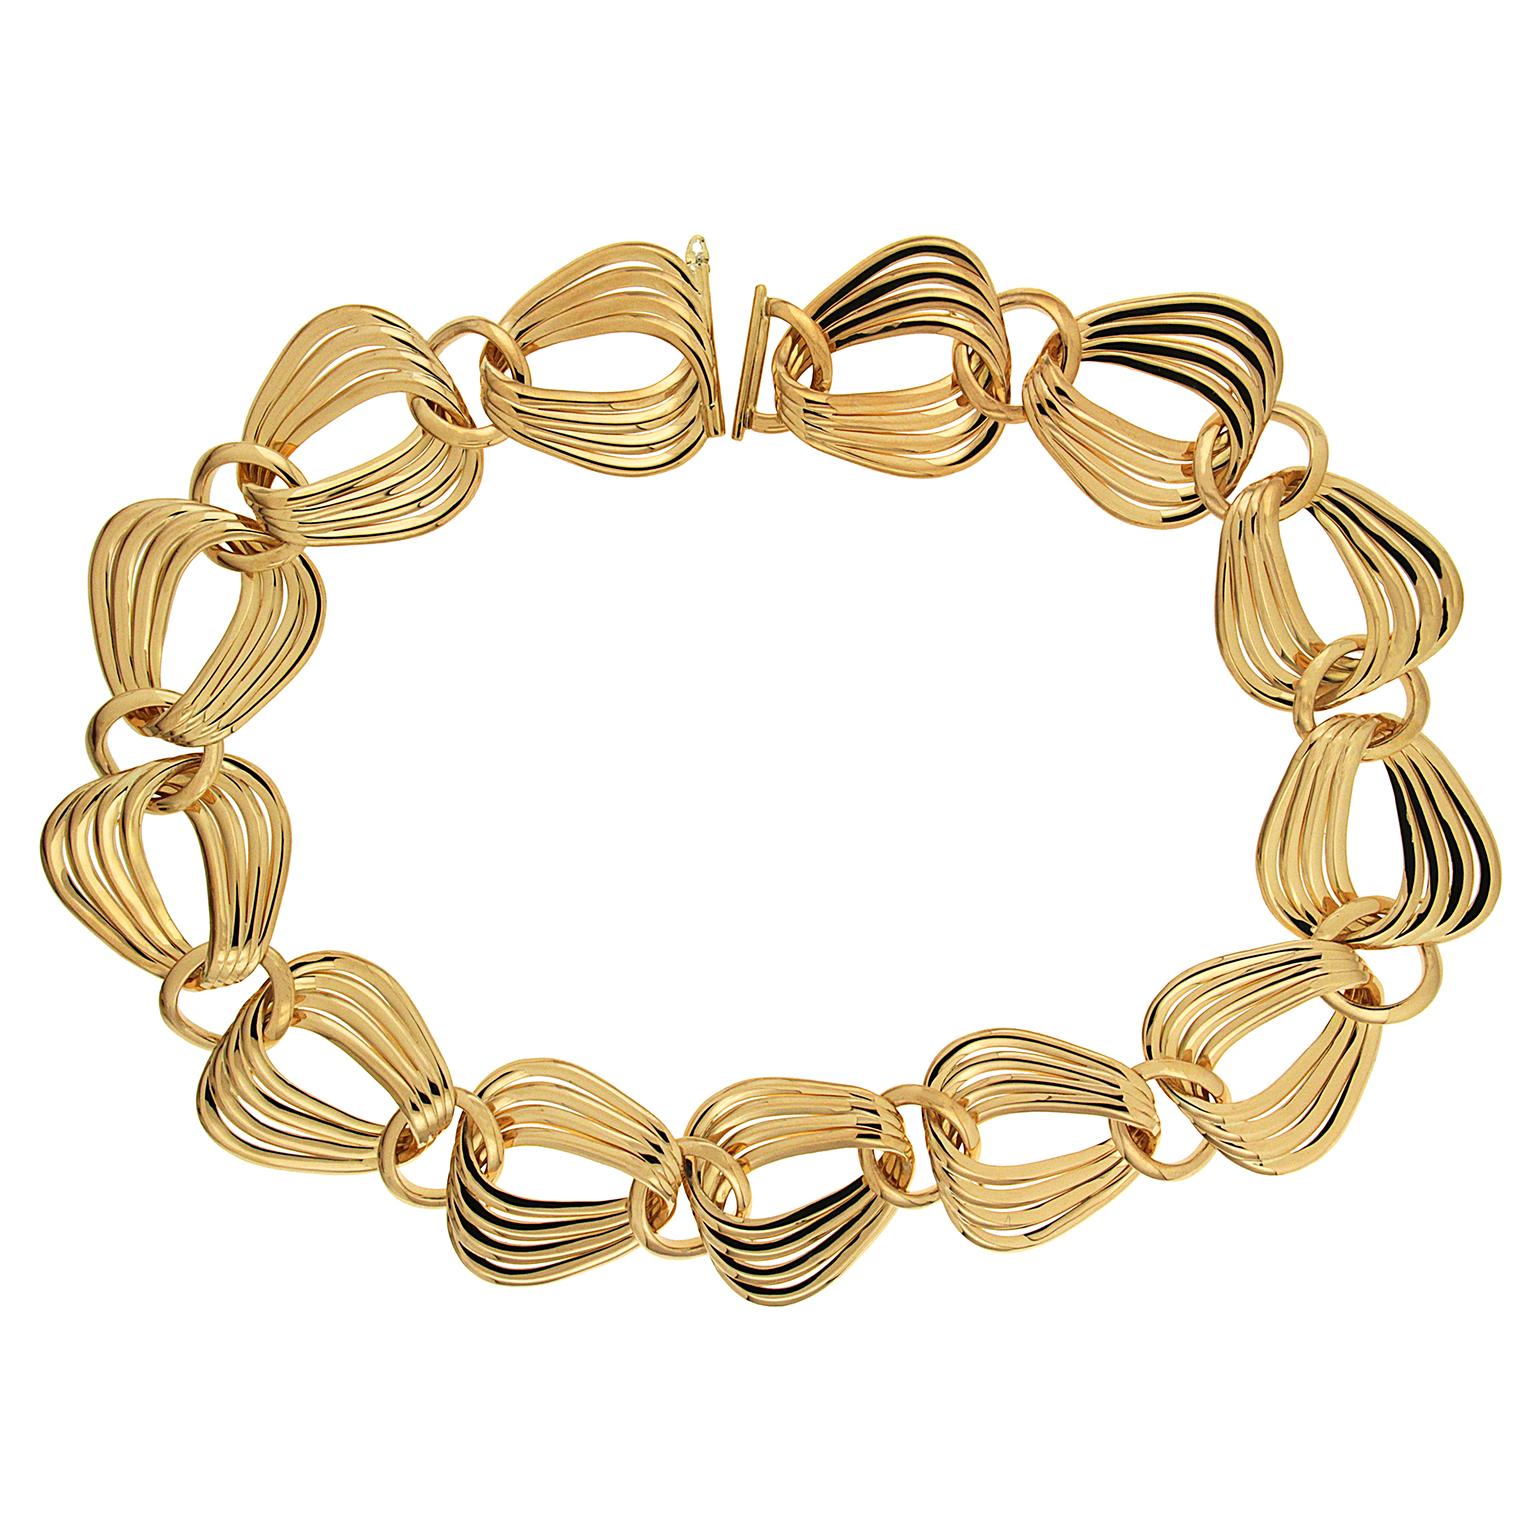 Variety influences this necklace created by Valentin Magro. Lone 18k yellow gold circles sit evenly throughout the design. Pear shaped links rest in loose clusters of four, fanning out to provide a sense of abundance. A simple clasp connects